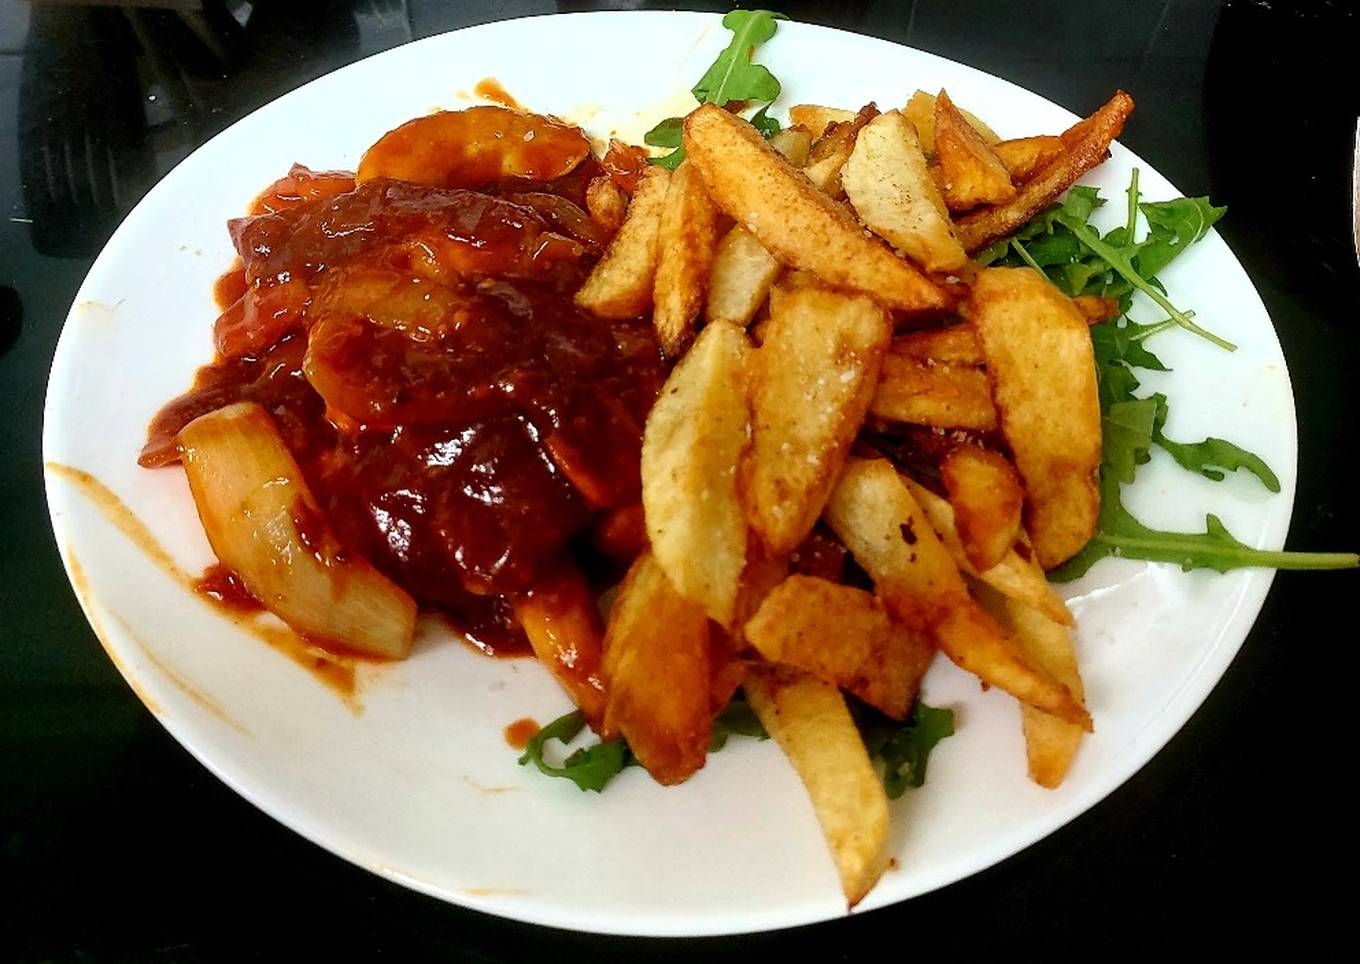 My Tasty Chicken, Onion in BBQ Sauce with Homemade Chips 🤩